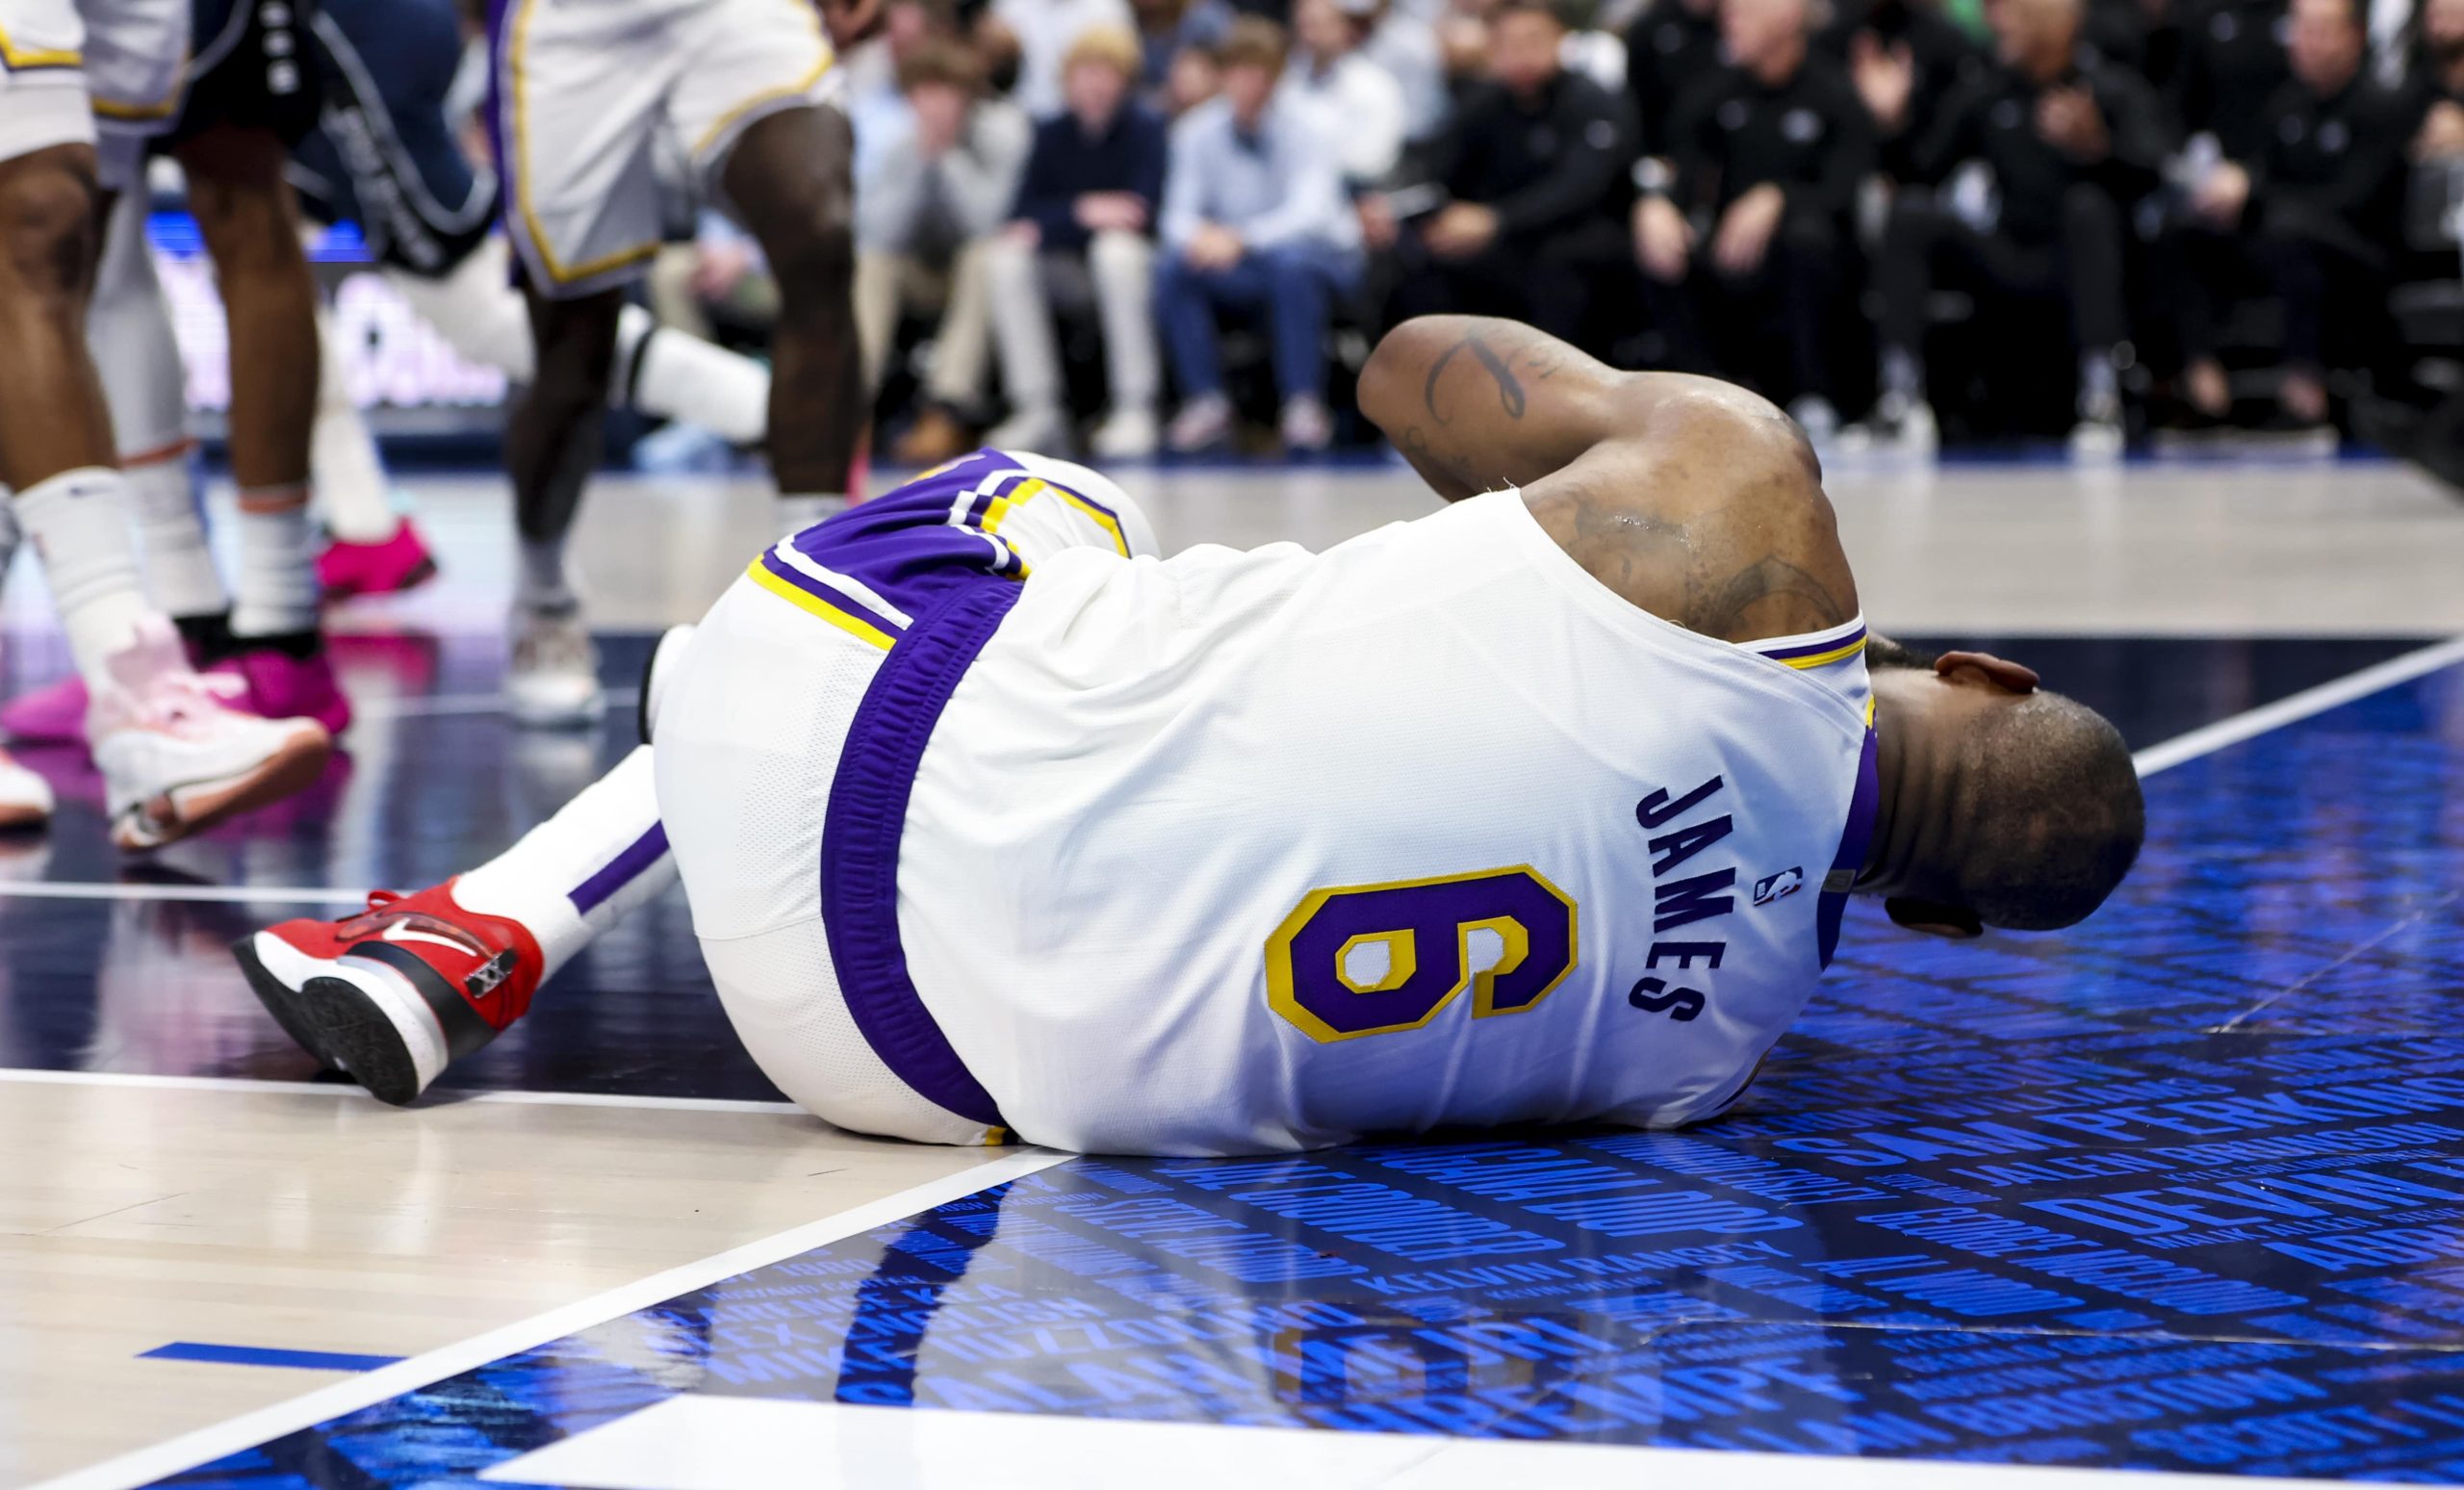 Lakers NBA Playoffs and Finals odds after LeBron James injury